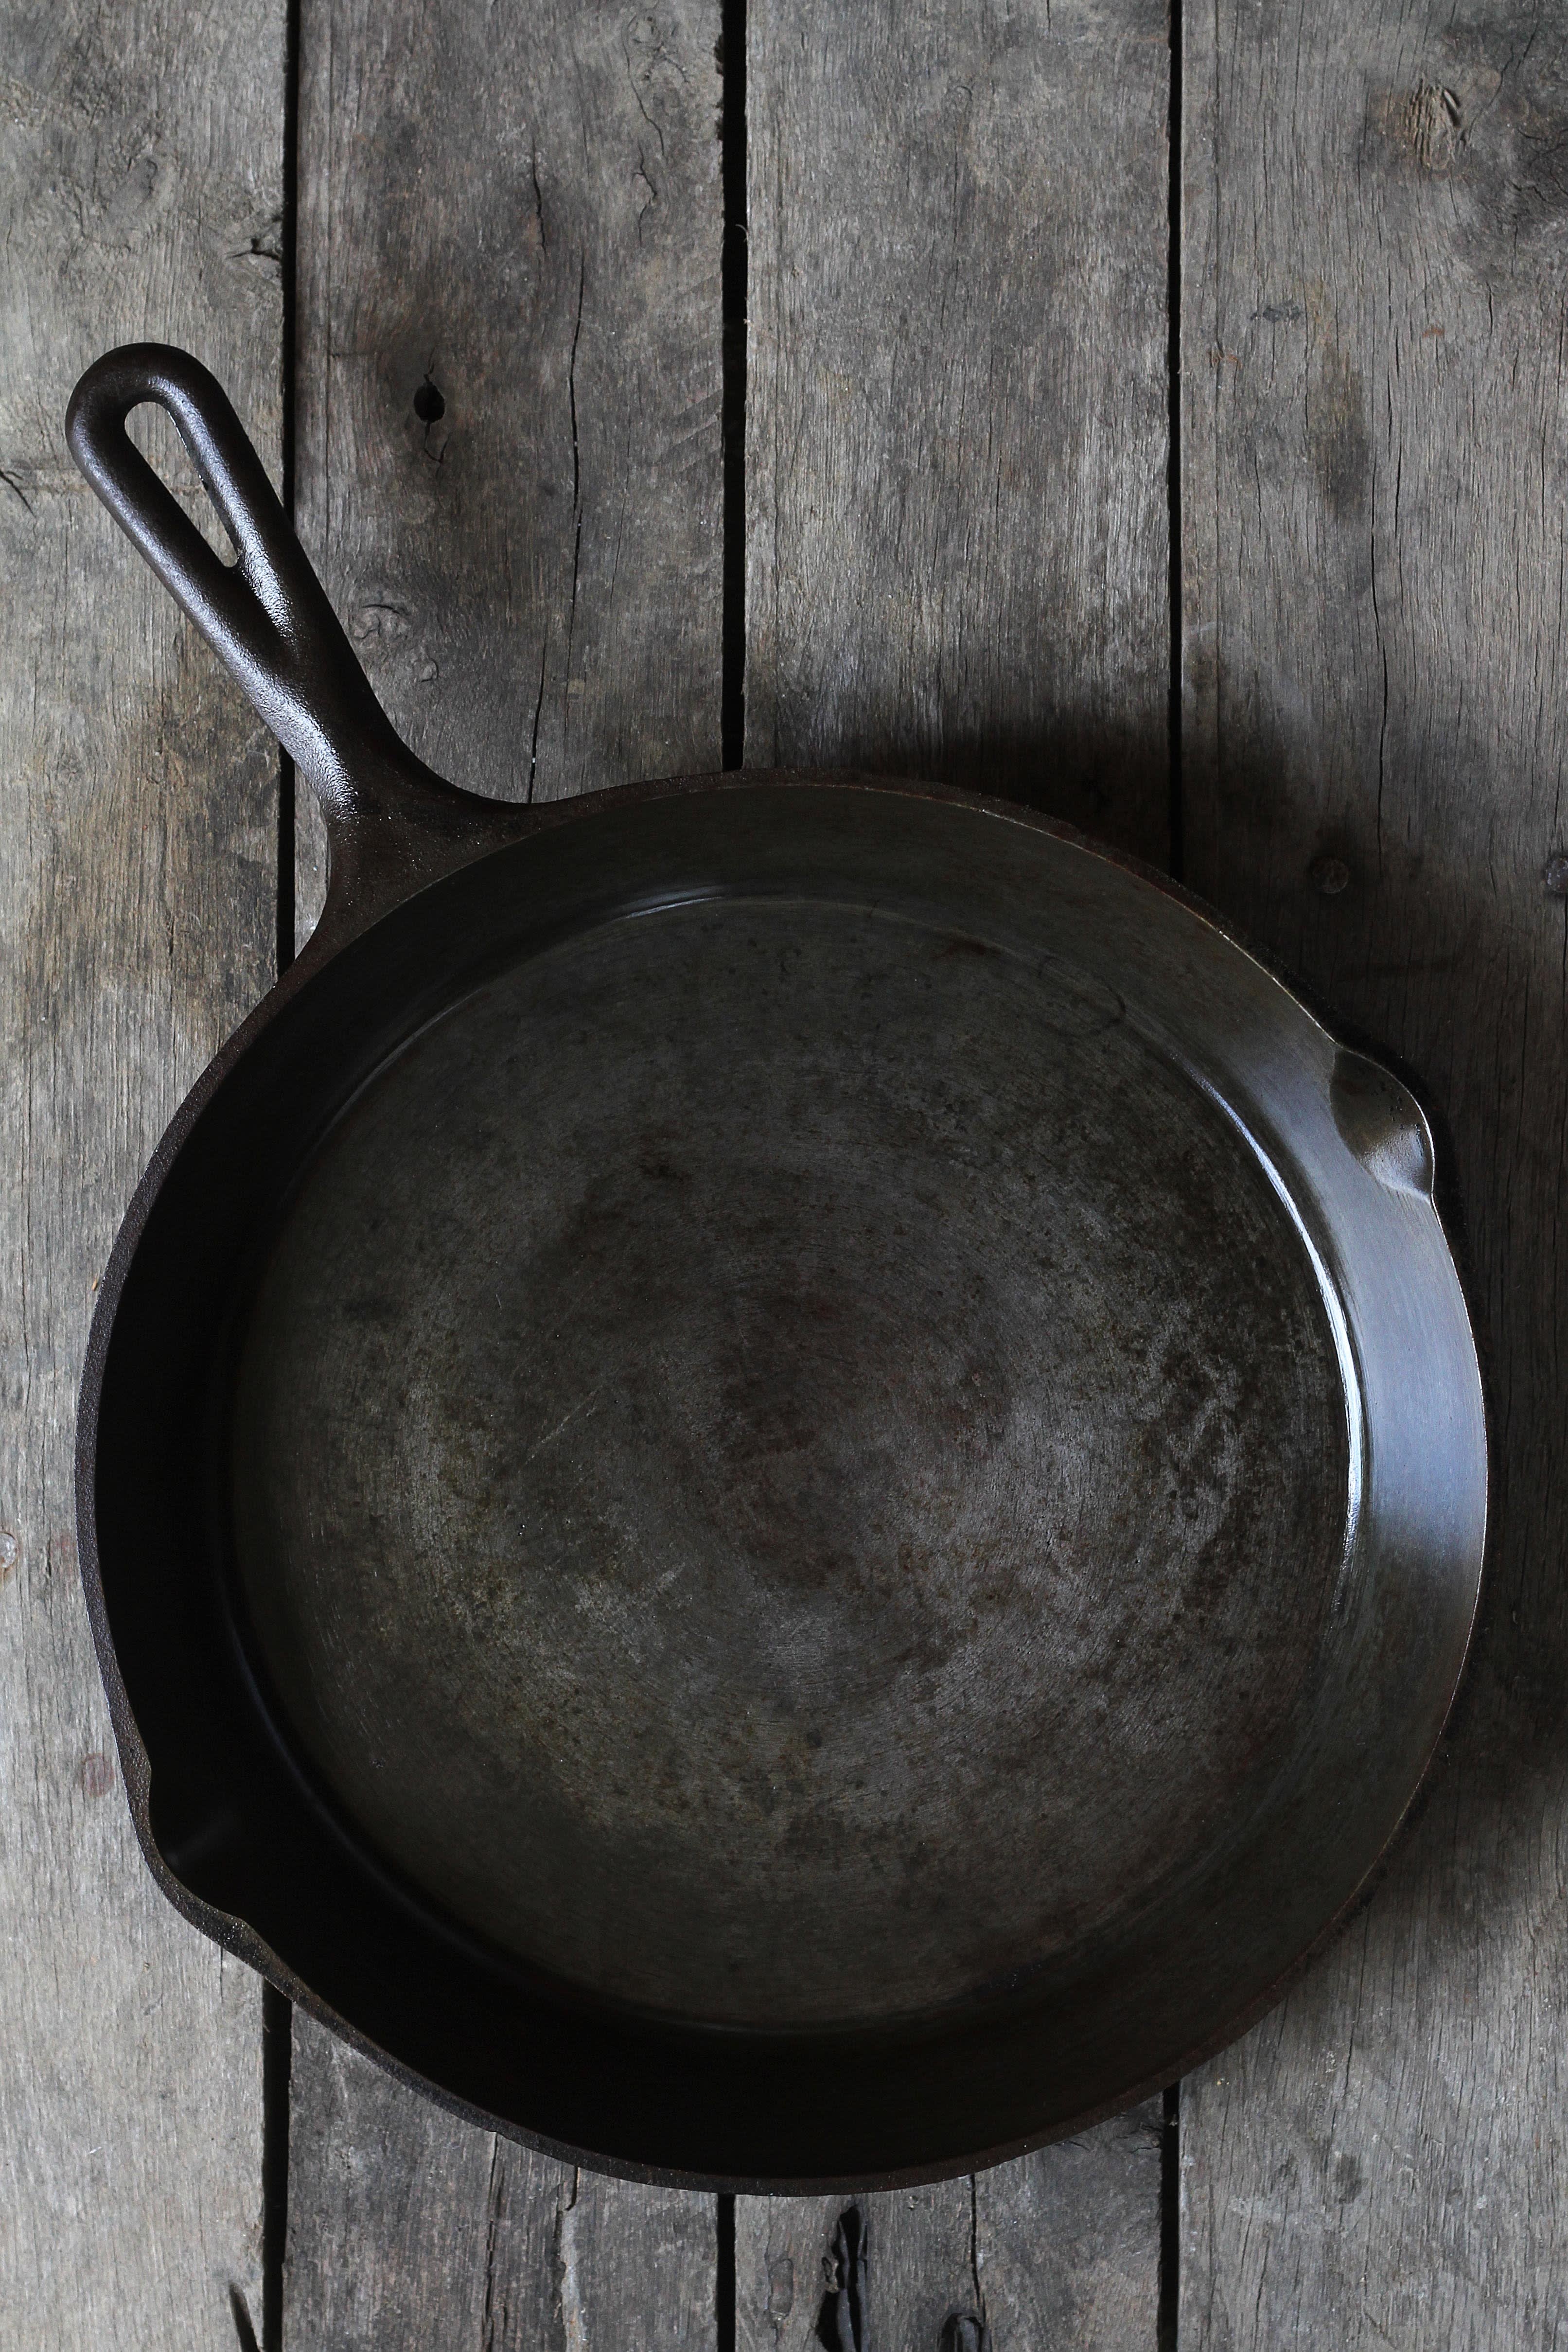 Cleaning Cast Iron Cookware: Salt Method - Our Twenty Minute